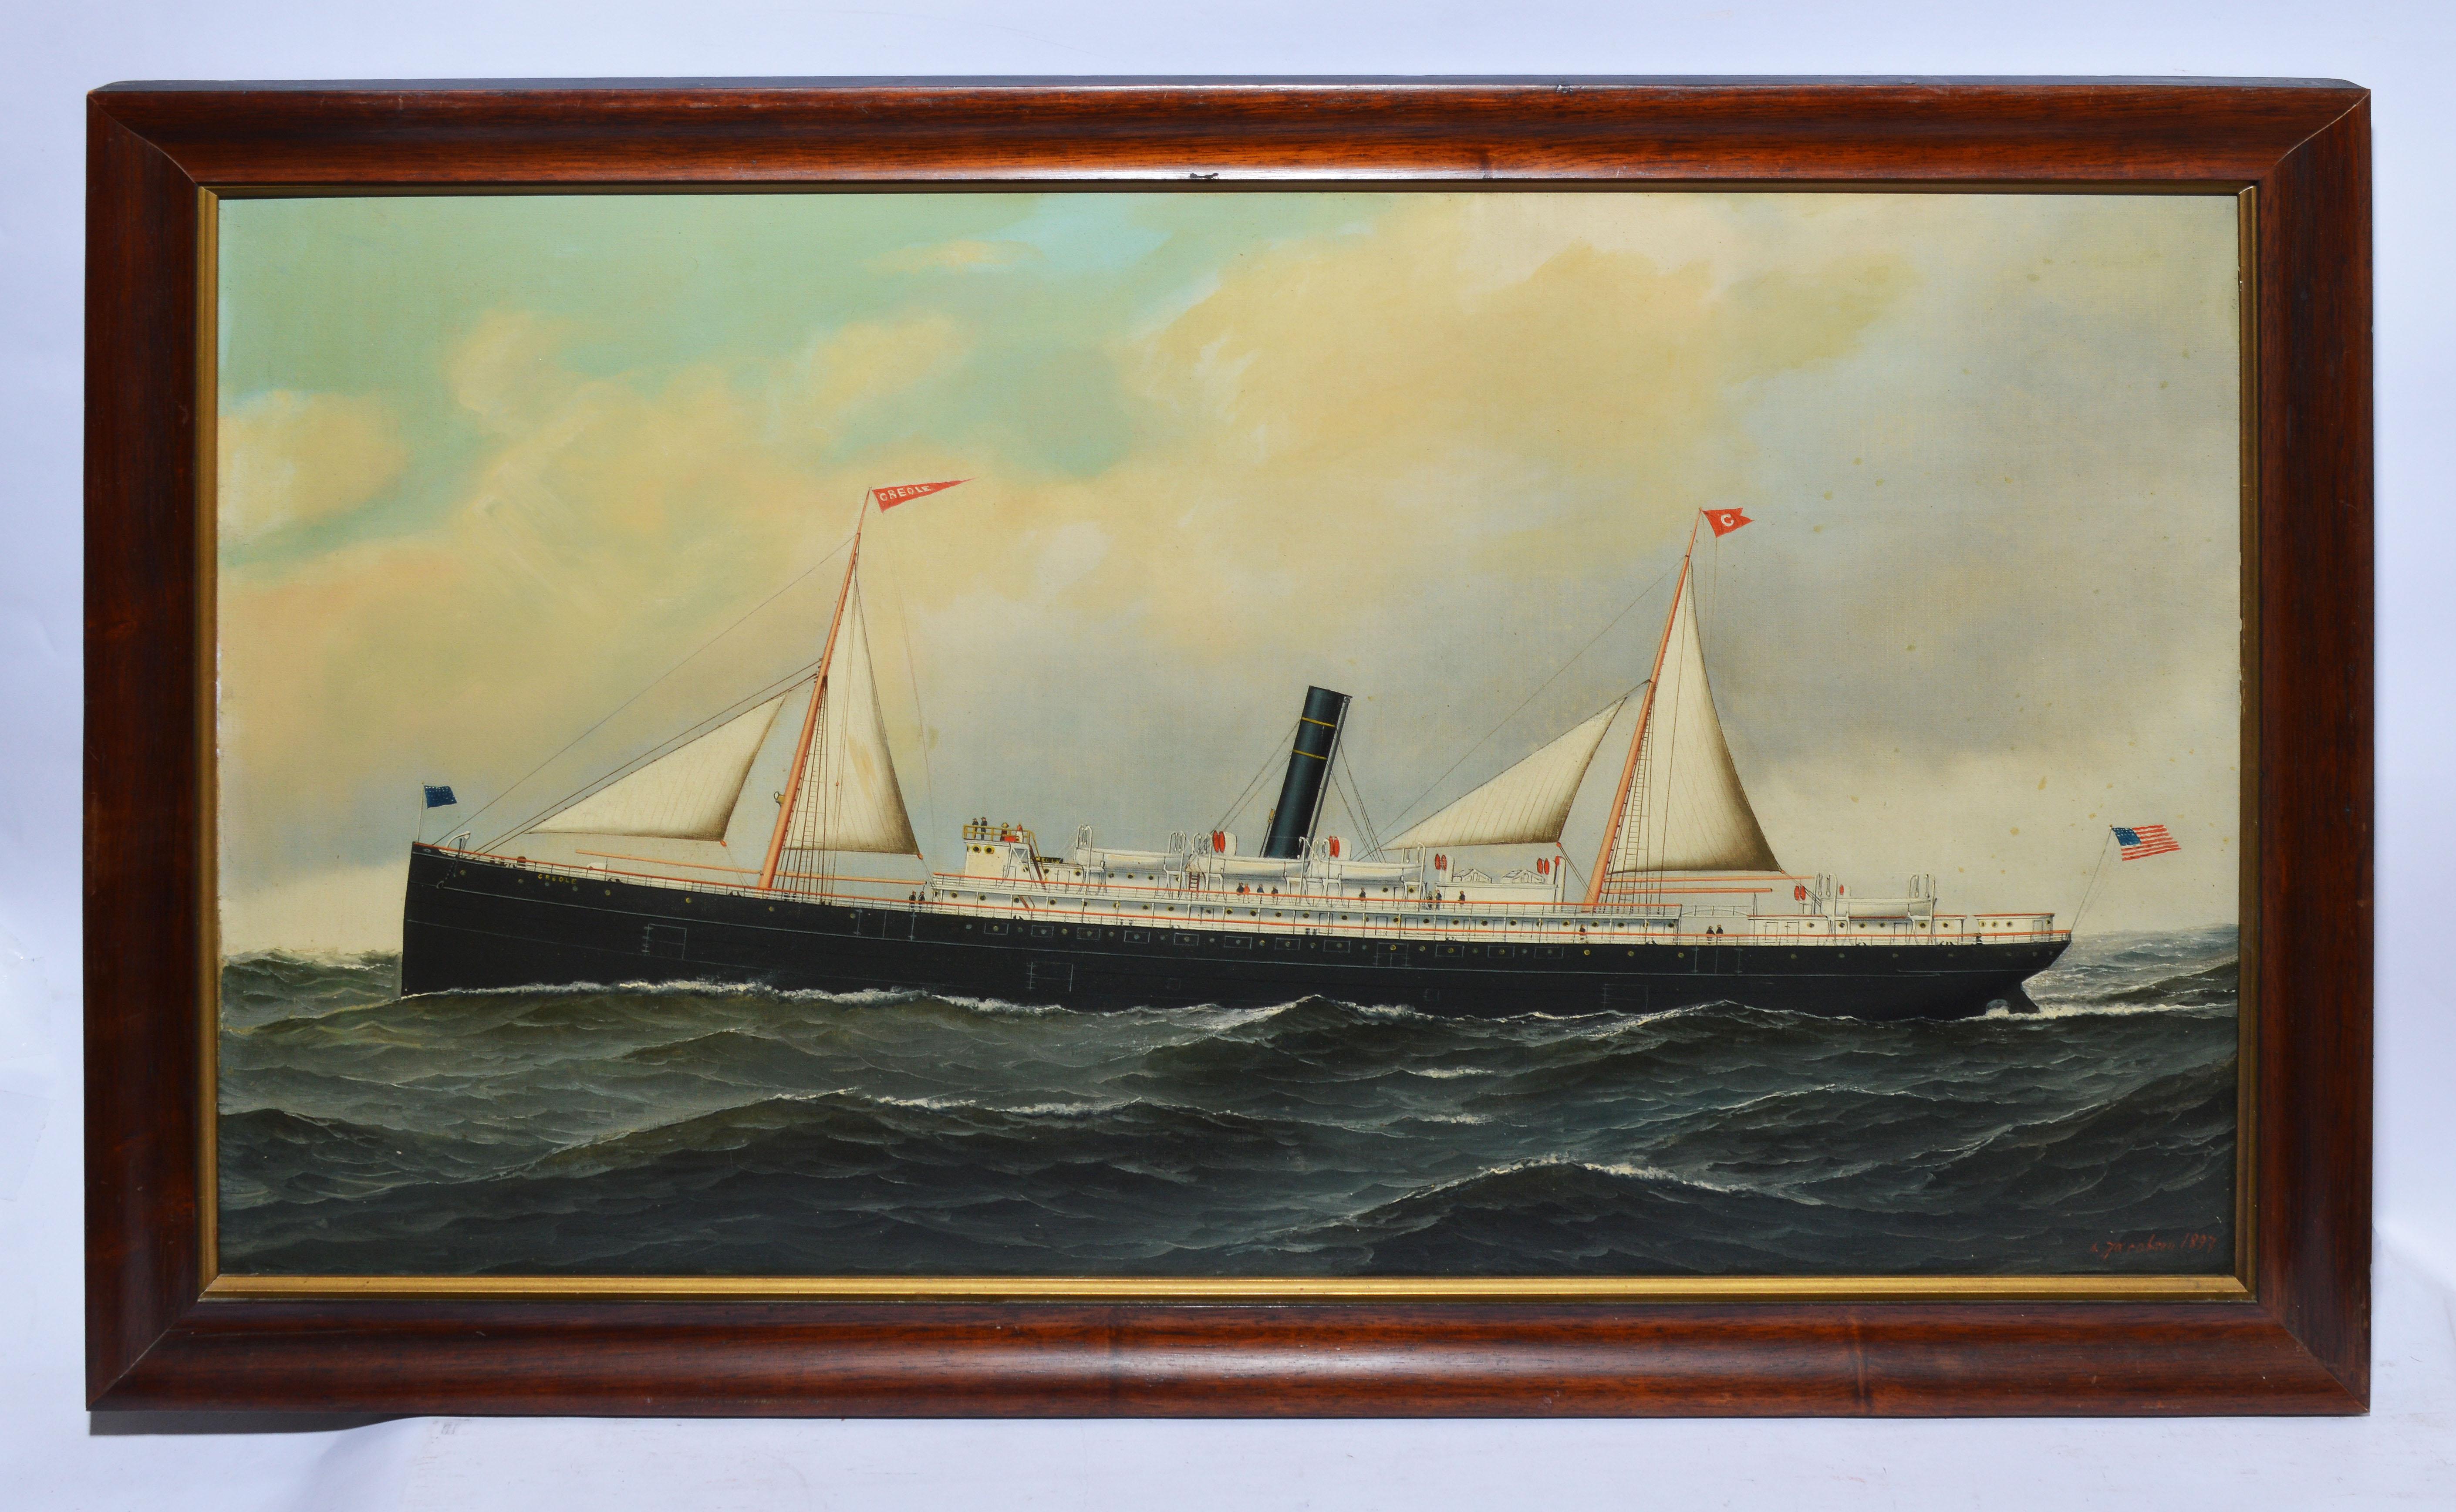 Antique nautical oil painting of the Creole by Antonio Nicolo Gasparo Jacobsen  (1850 - 1921) .  Oil on board, circa 1908.  Signed.  Displayed in a giltwood frame.  Image, 36